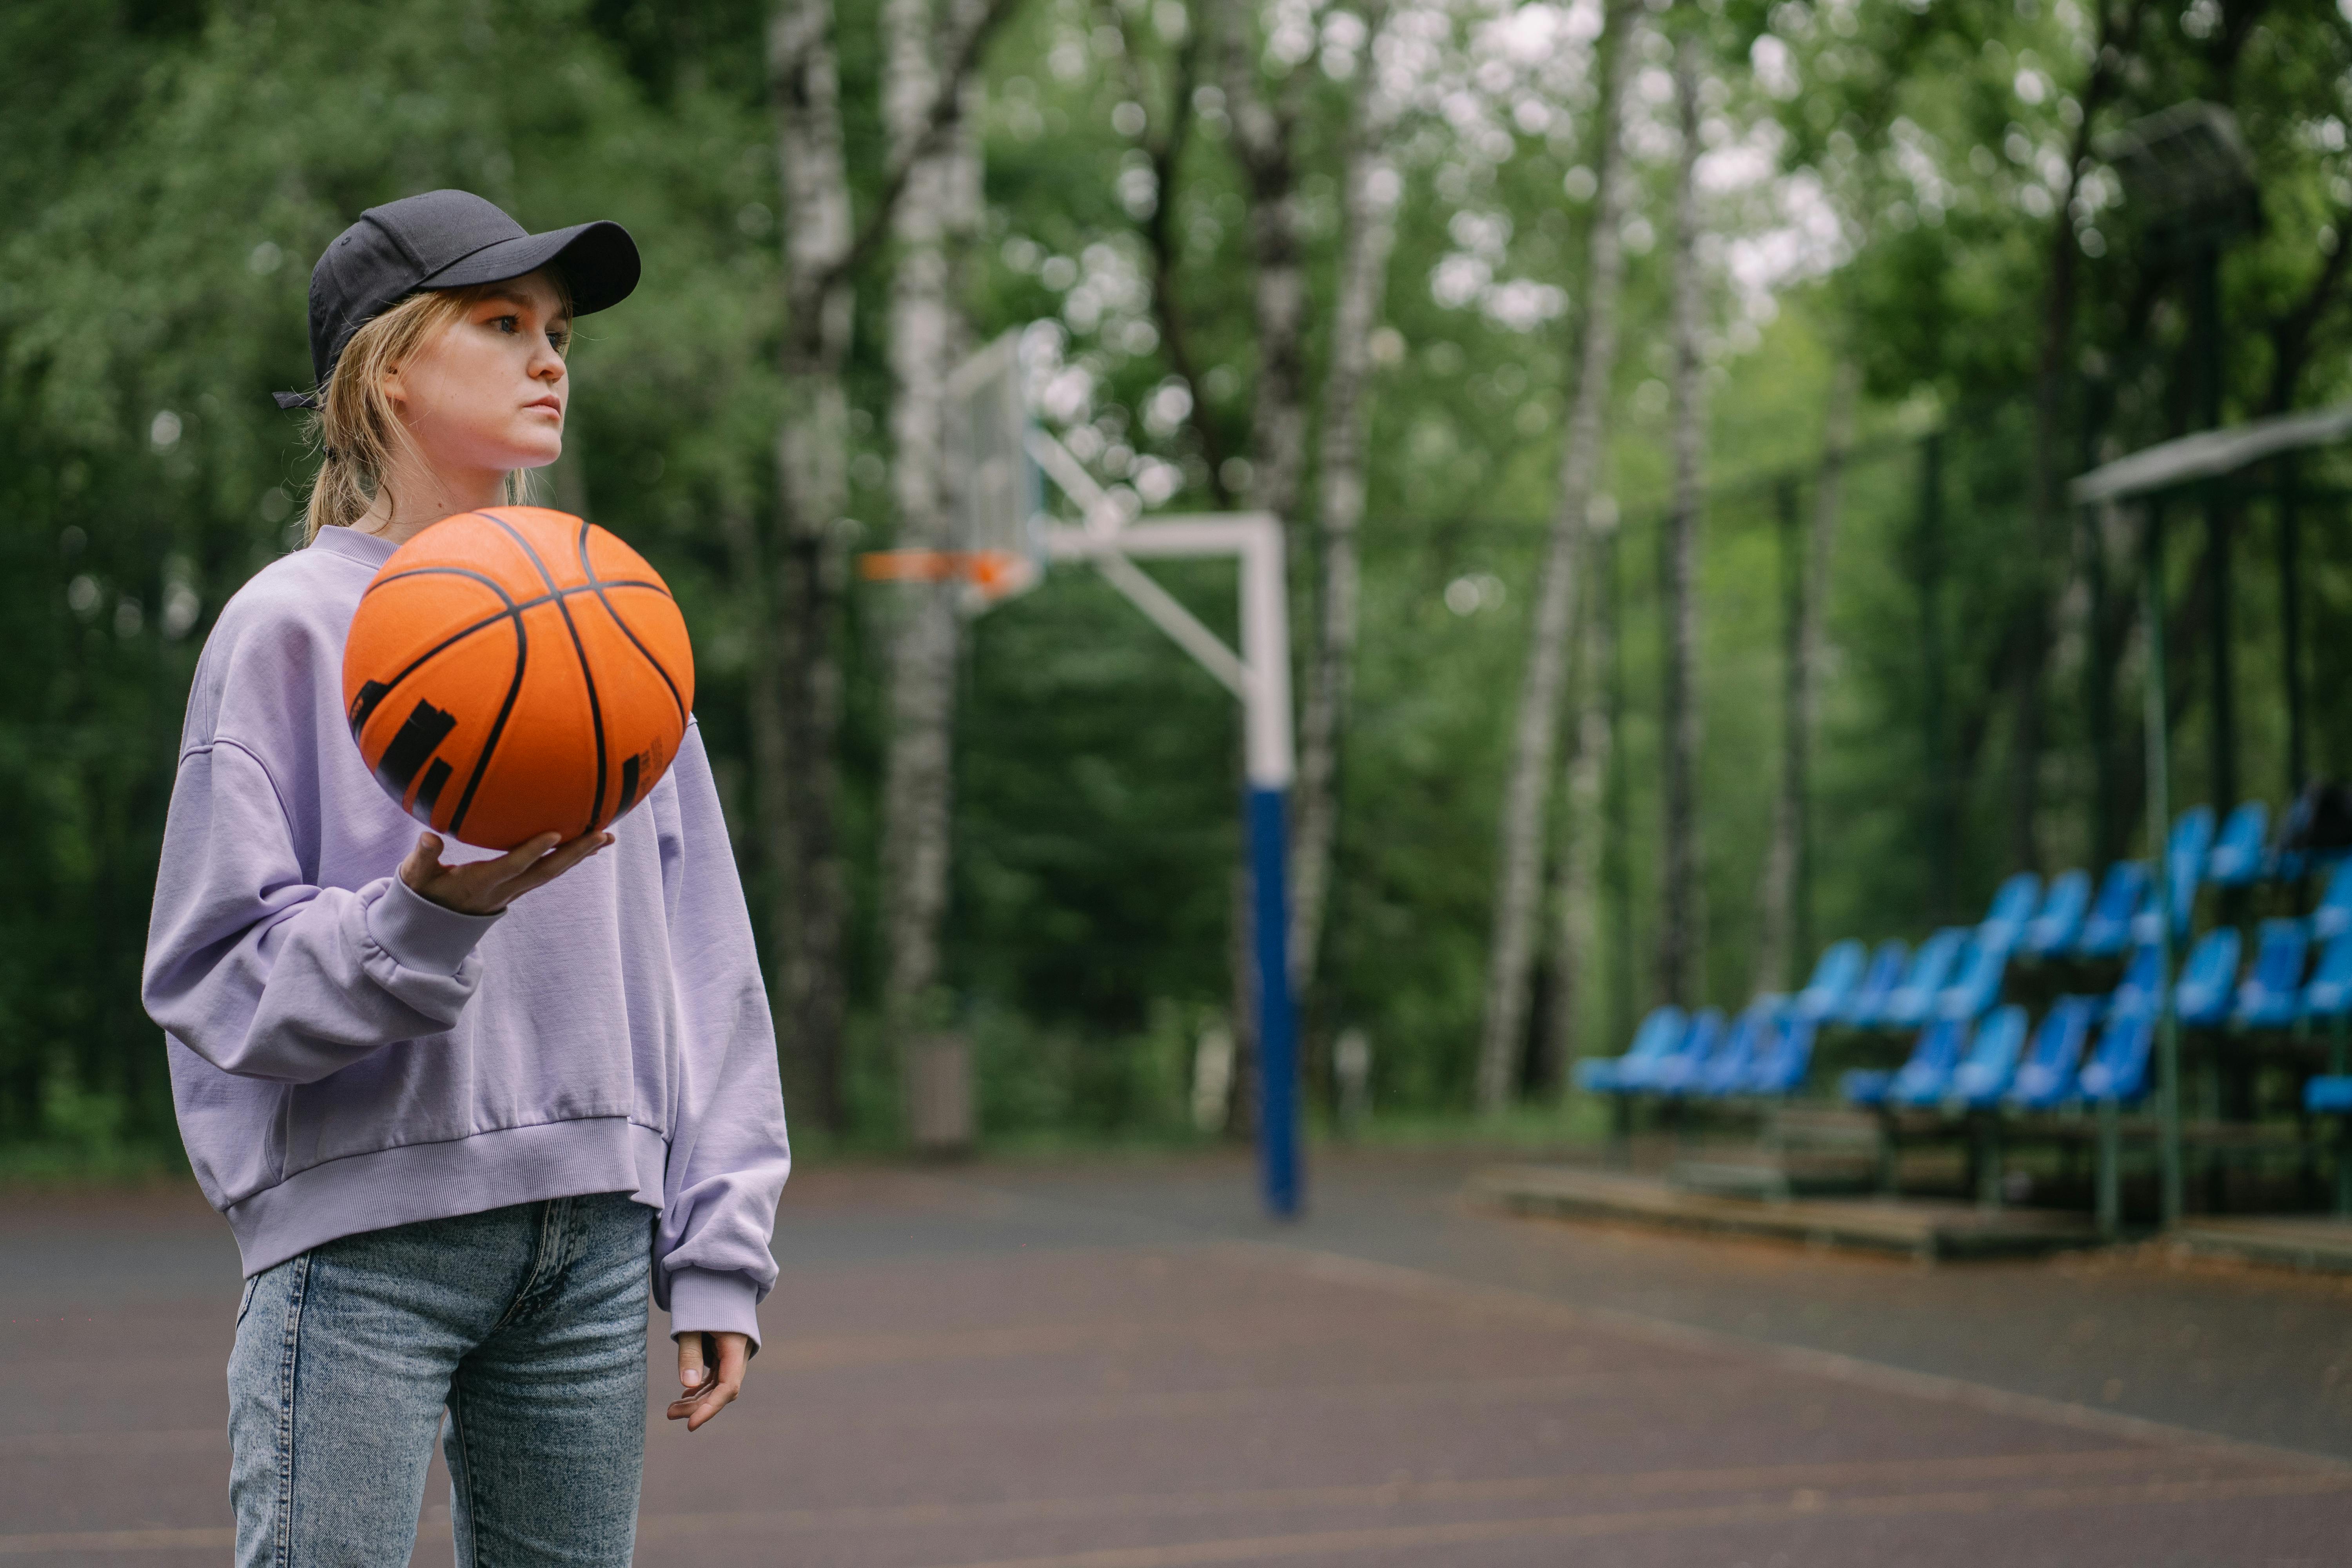 A Woman Wearing Black Cap While Holding Ball · Free Stock Photo